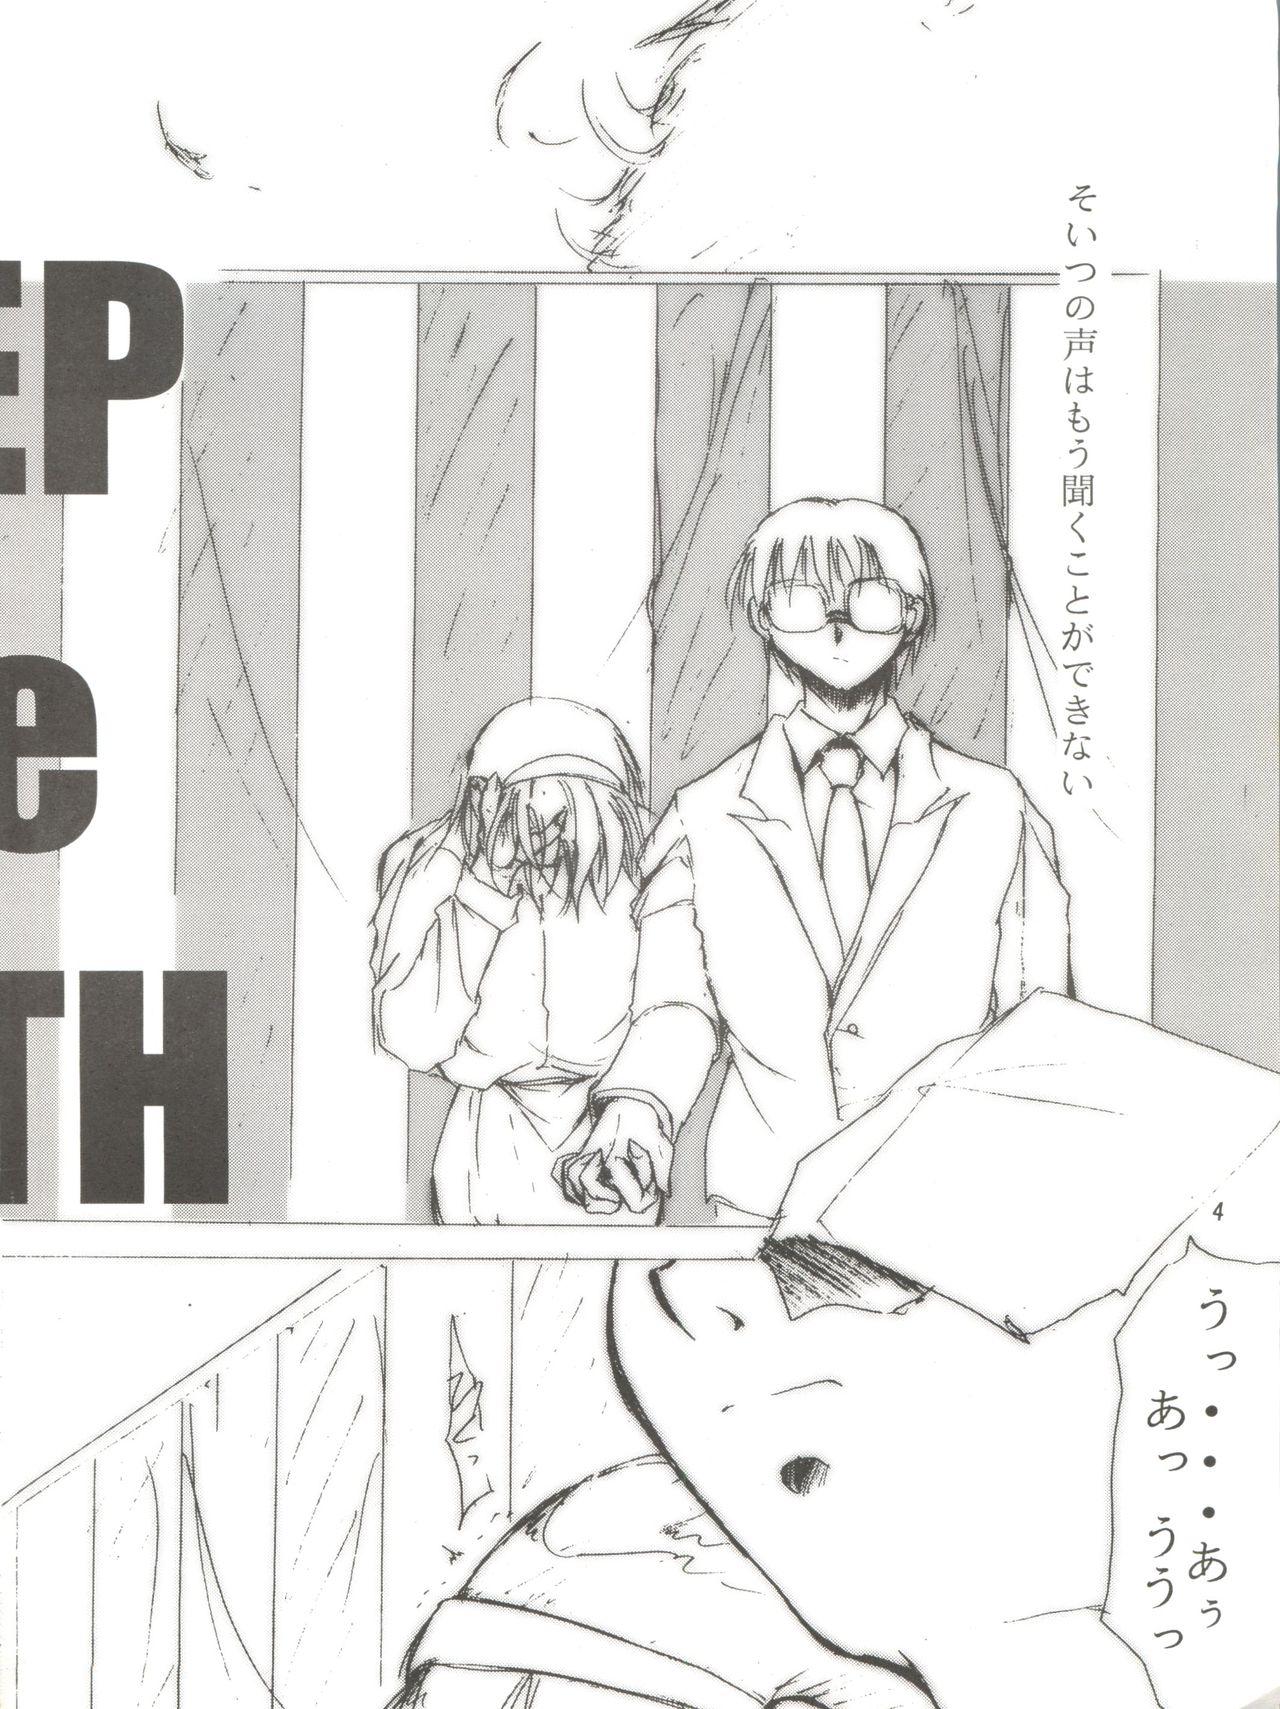 Amatuer Keep the Faith - Saber marionette Kare kano Mamotte shugogetten Teen Fuck - Page 3